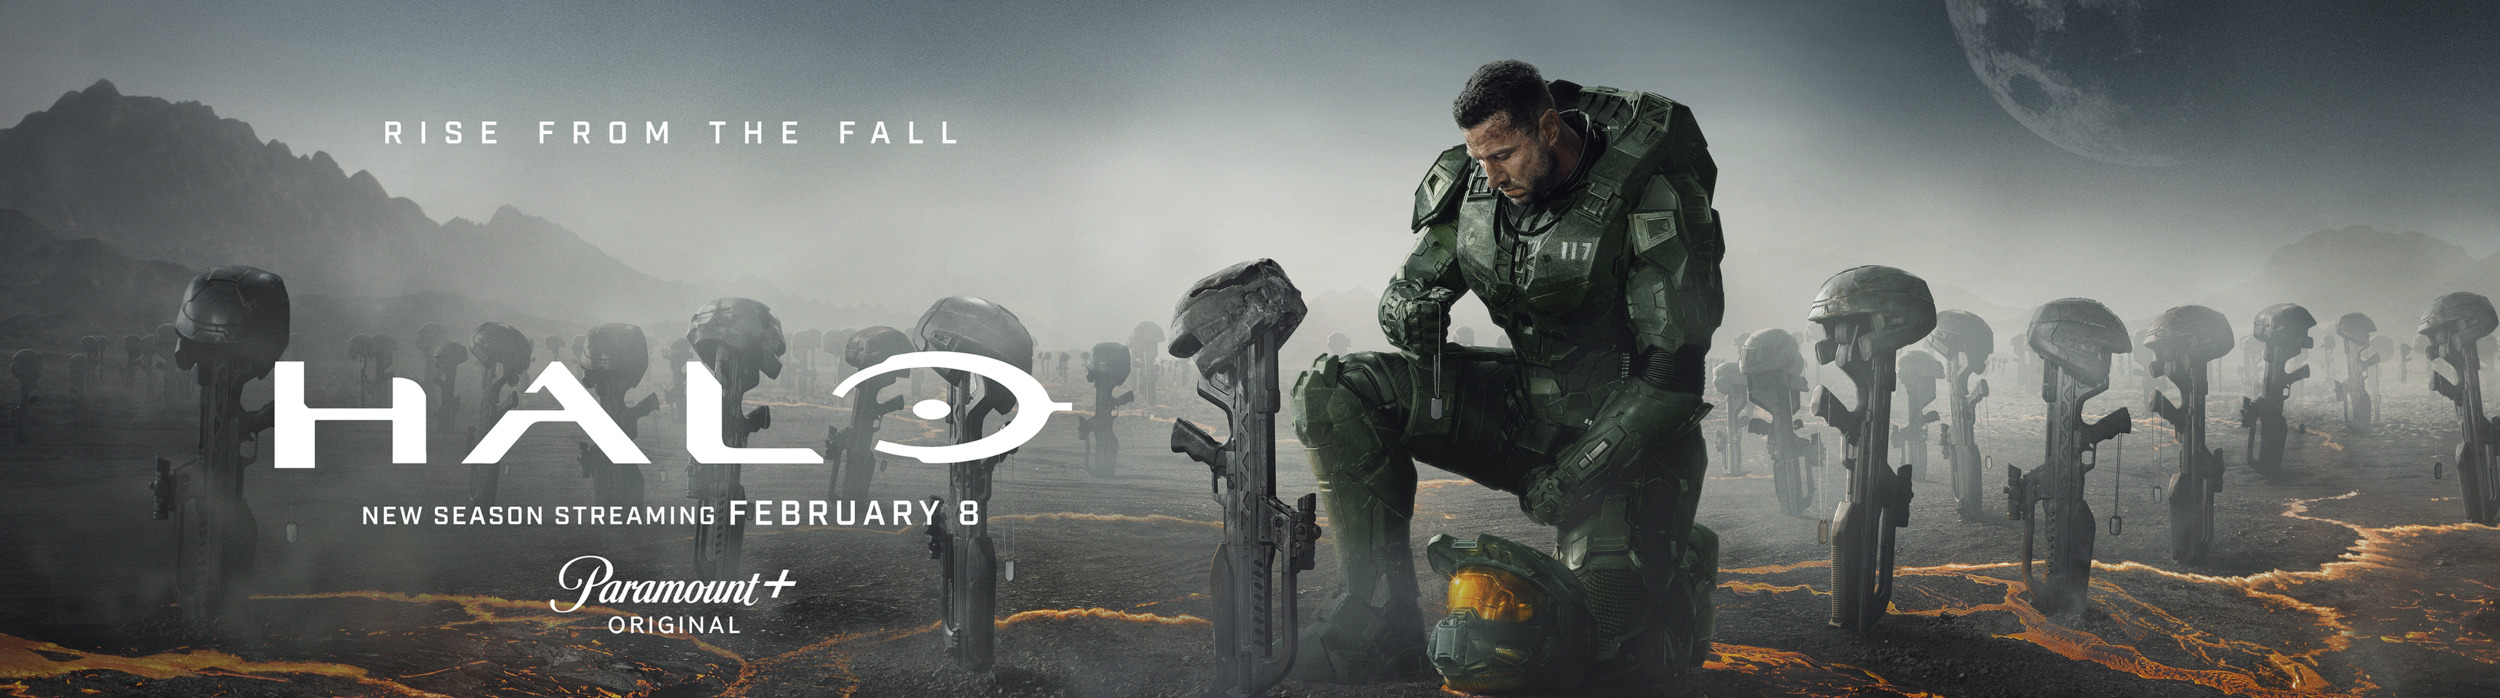 Mega Sized TV Poster Image for Halo (#11 of 27)